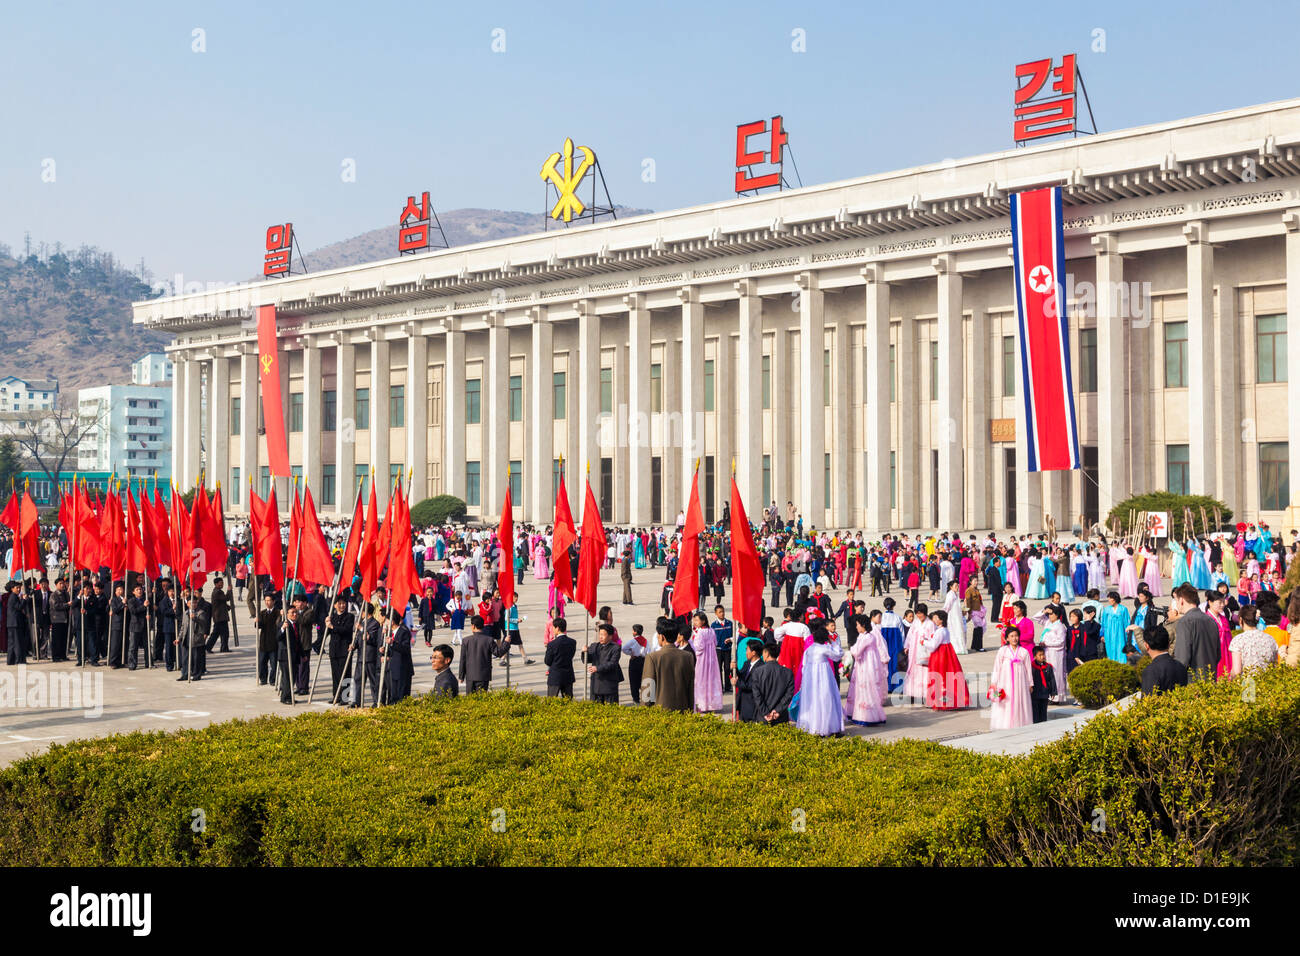 Celebrations on the 100th anniversary of the birth of President Kim Il Sung on April 15th 2012, Pyongshong, North Korea Stock Photo